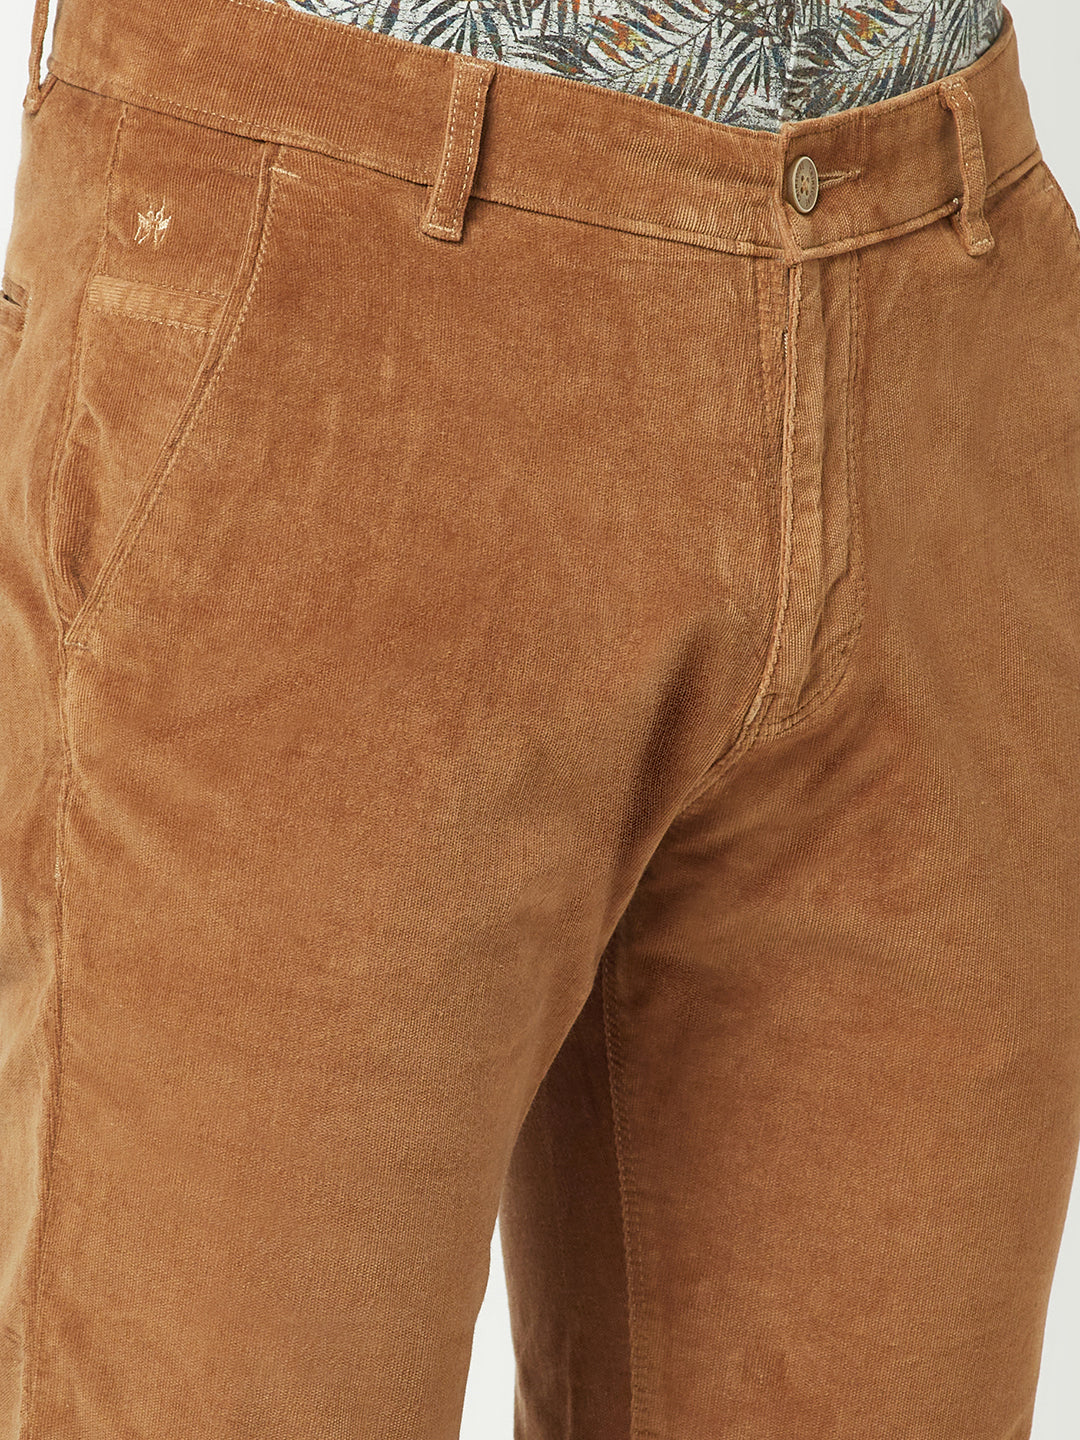 Levi's Men's 511 Slim Fit Jeans - Chocolate Brown Corduroy — Dave's New York